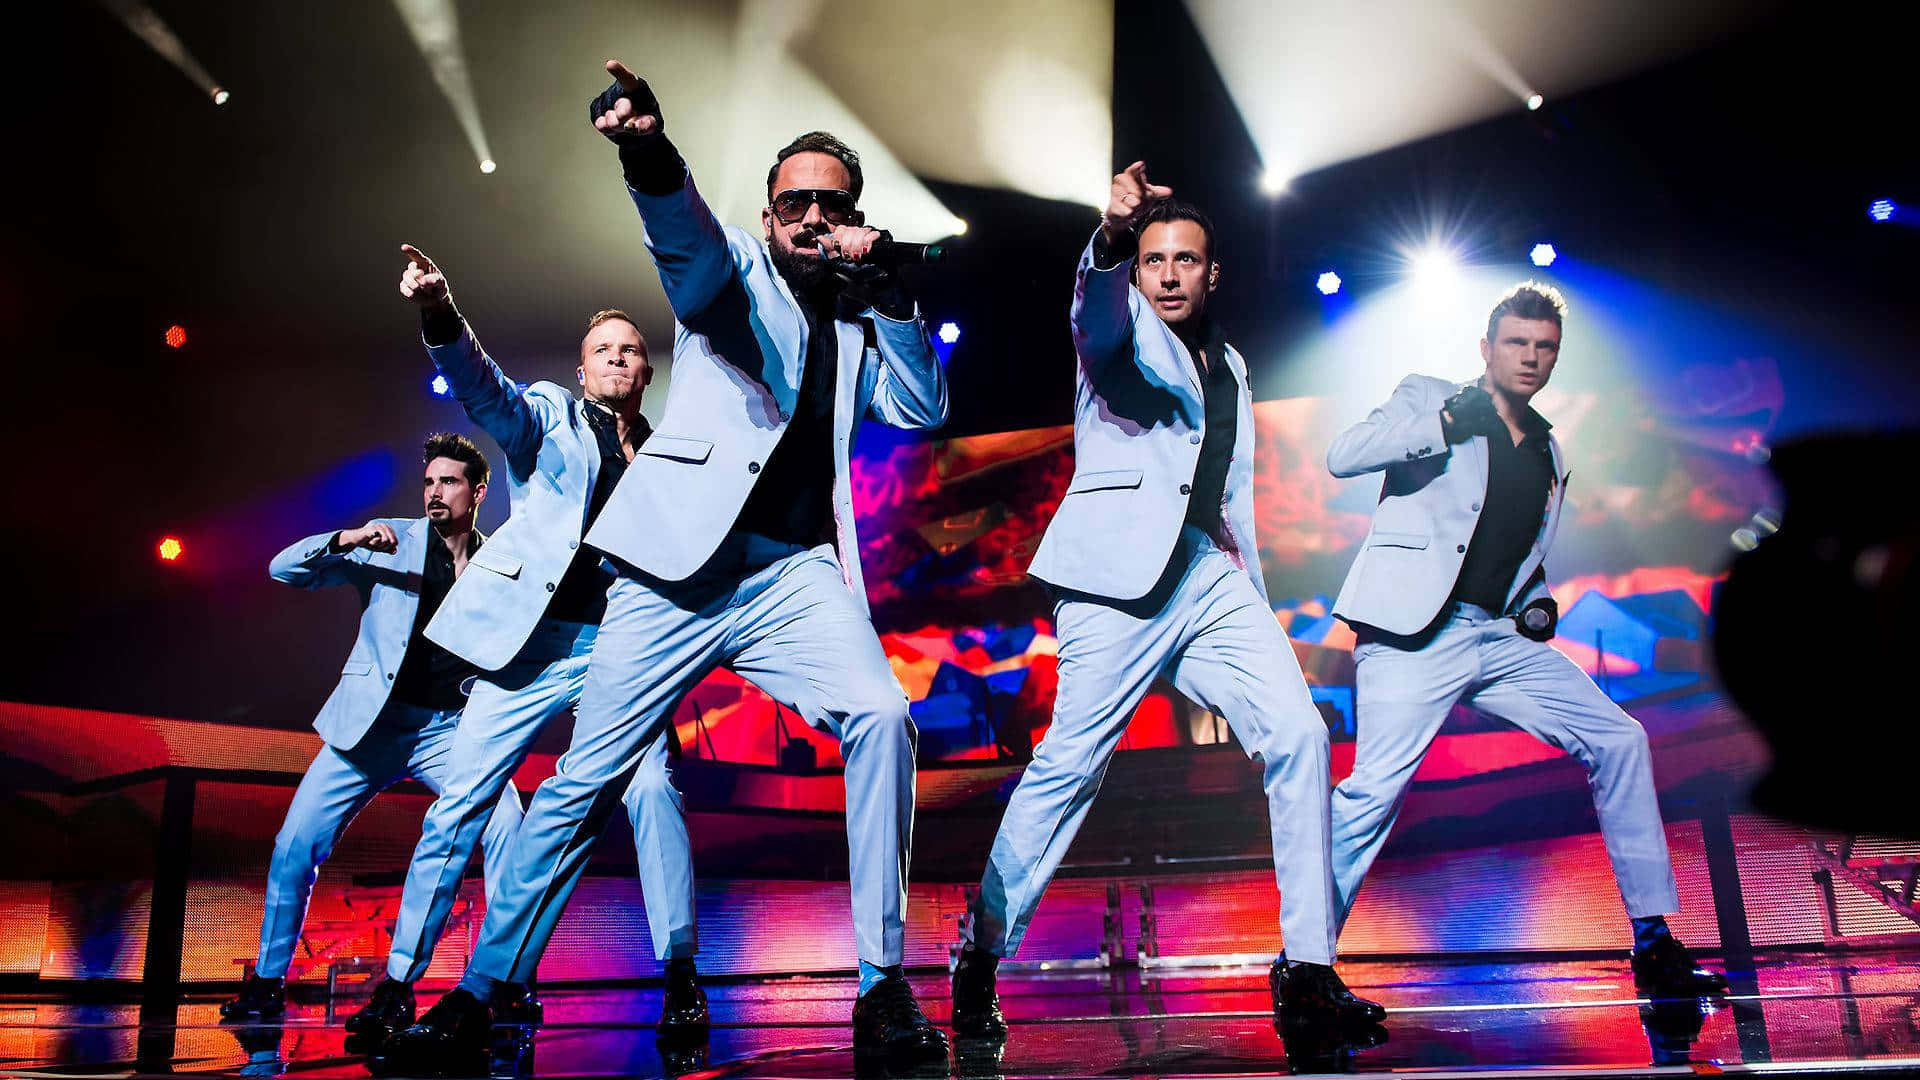 The lads of Backstreet Boys- AJ, Nick, Howie, Brian, and Kevin.